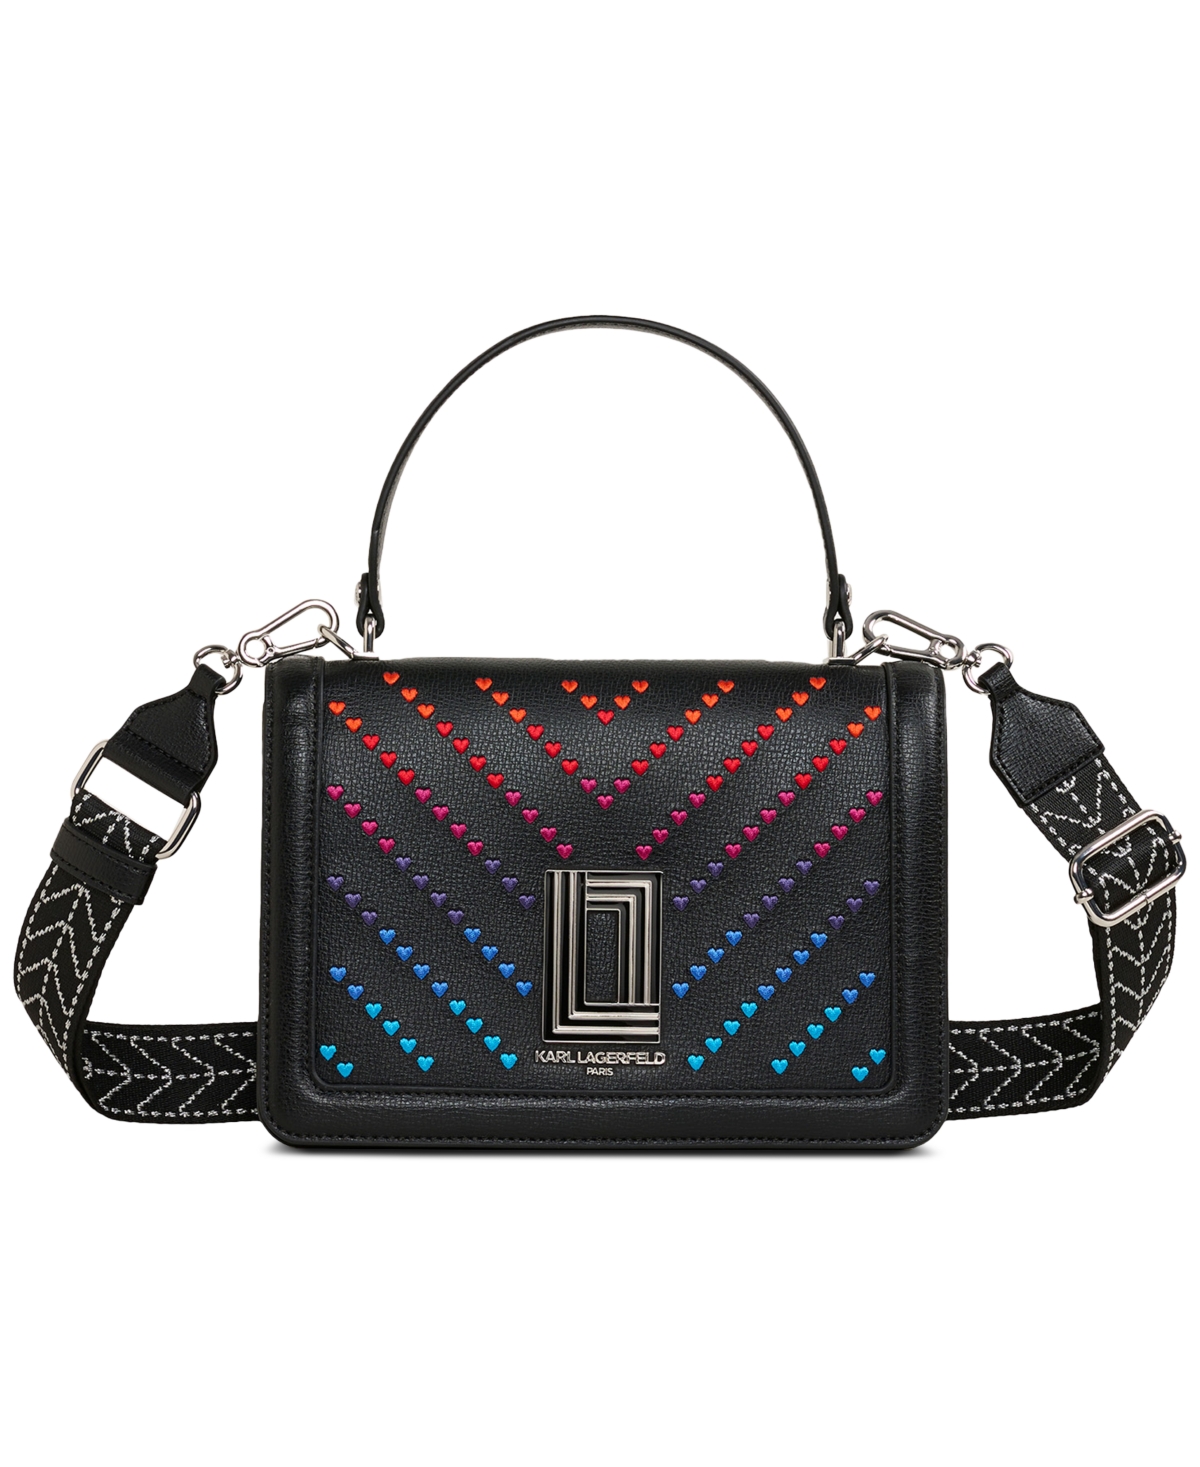 Karl Lagerfeld Simone Flap Leather Crossbody In Black Ombre